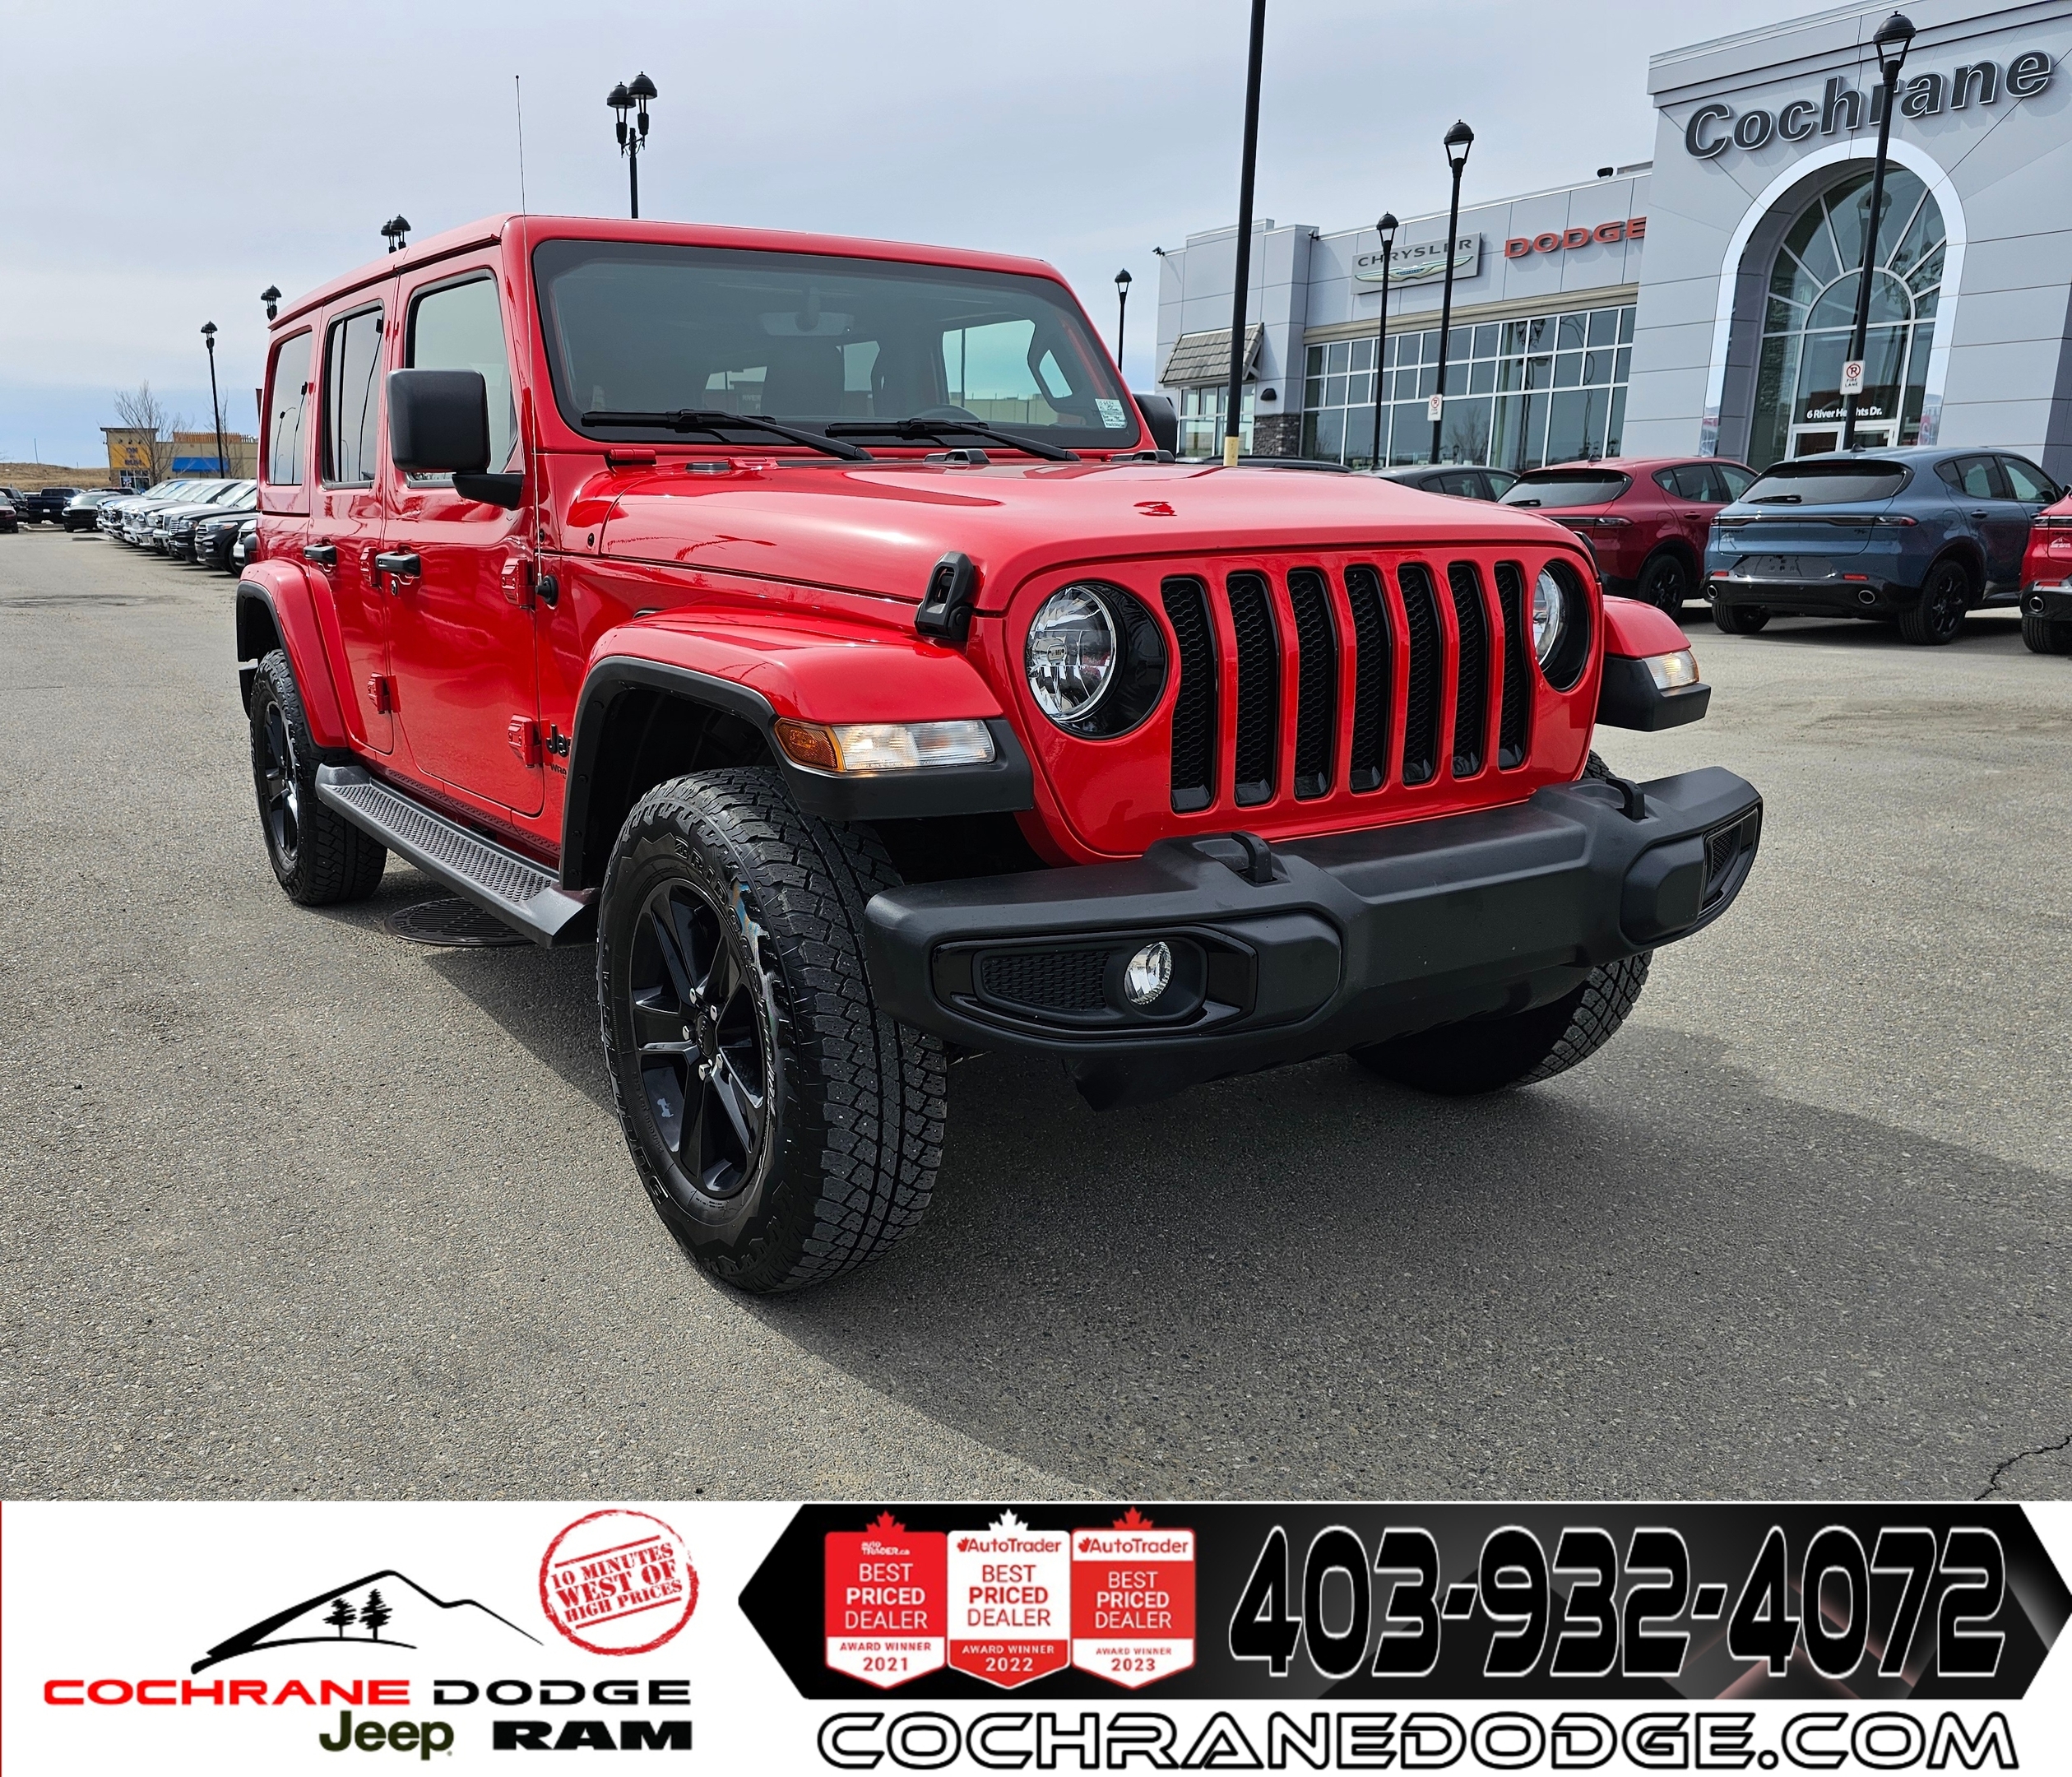 2021 Jeep Wrangler Unlimited Altitude 4x4 LOADED!